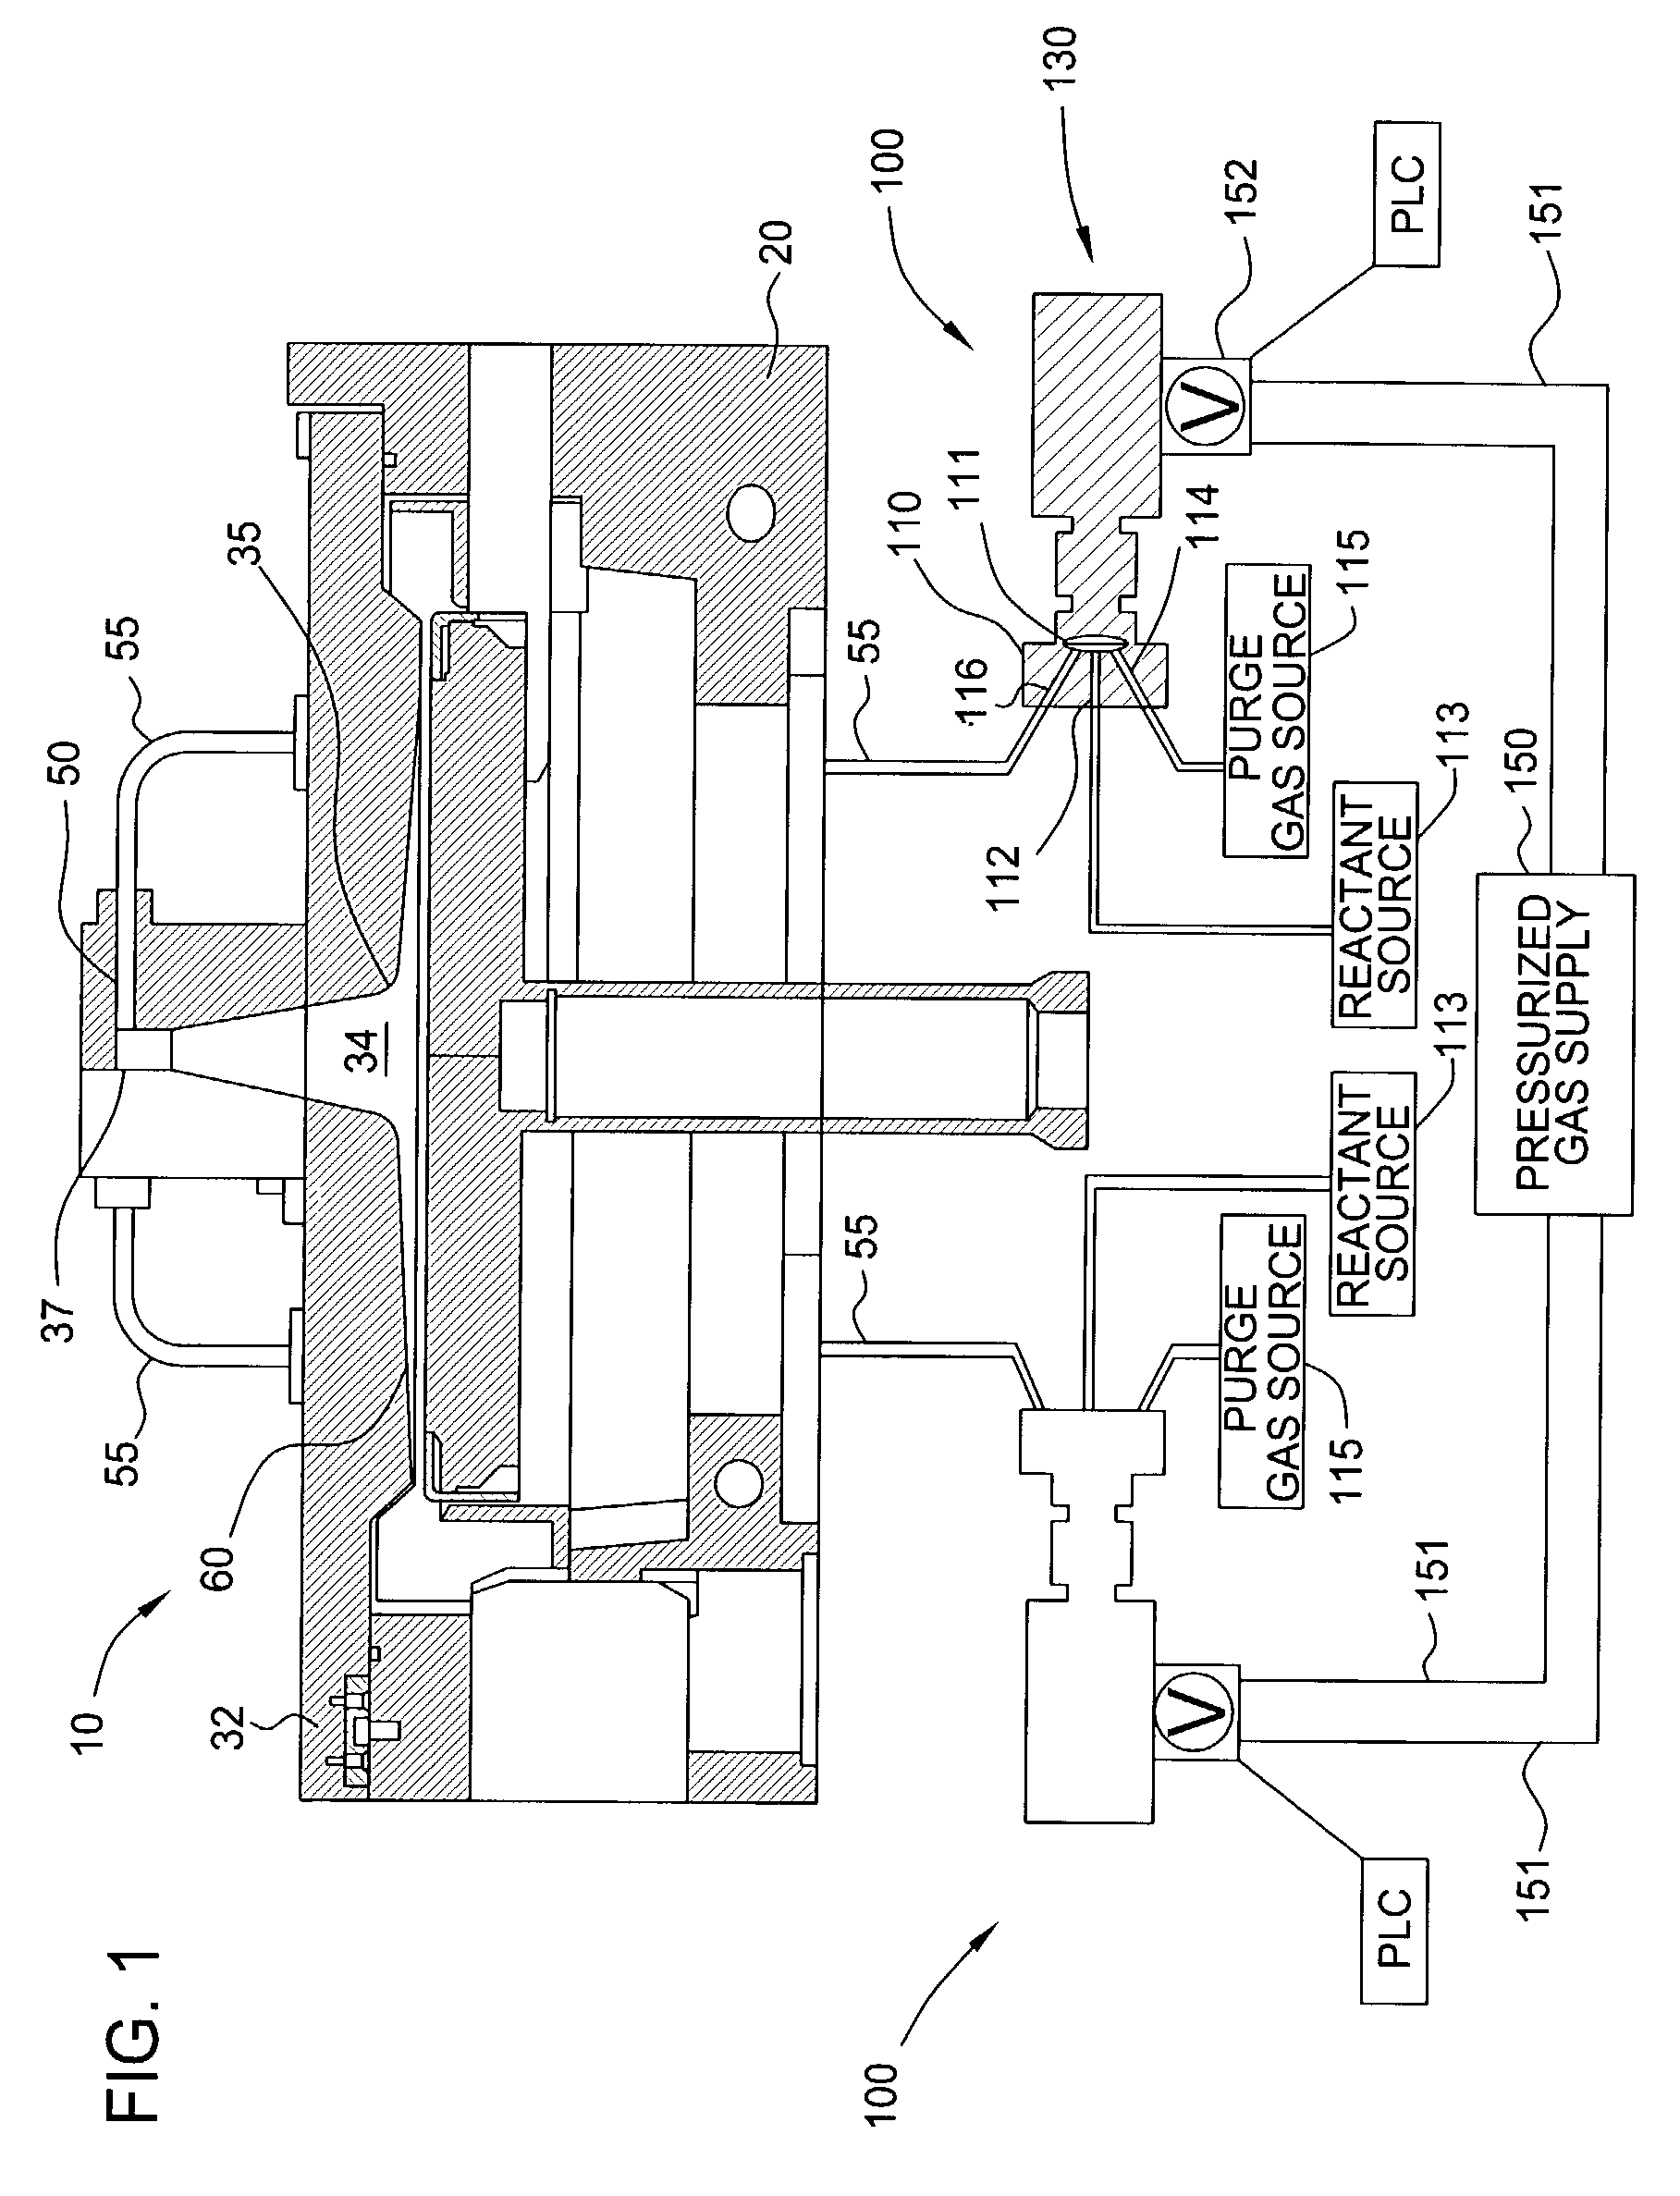 Valve design and configuration for fast delivery system